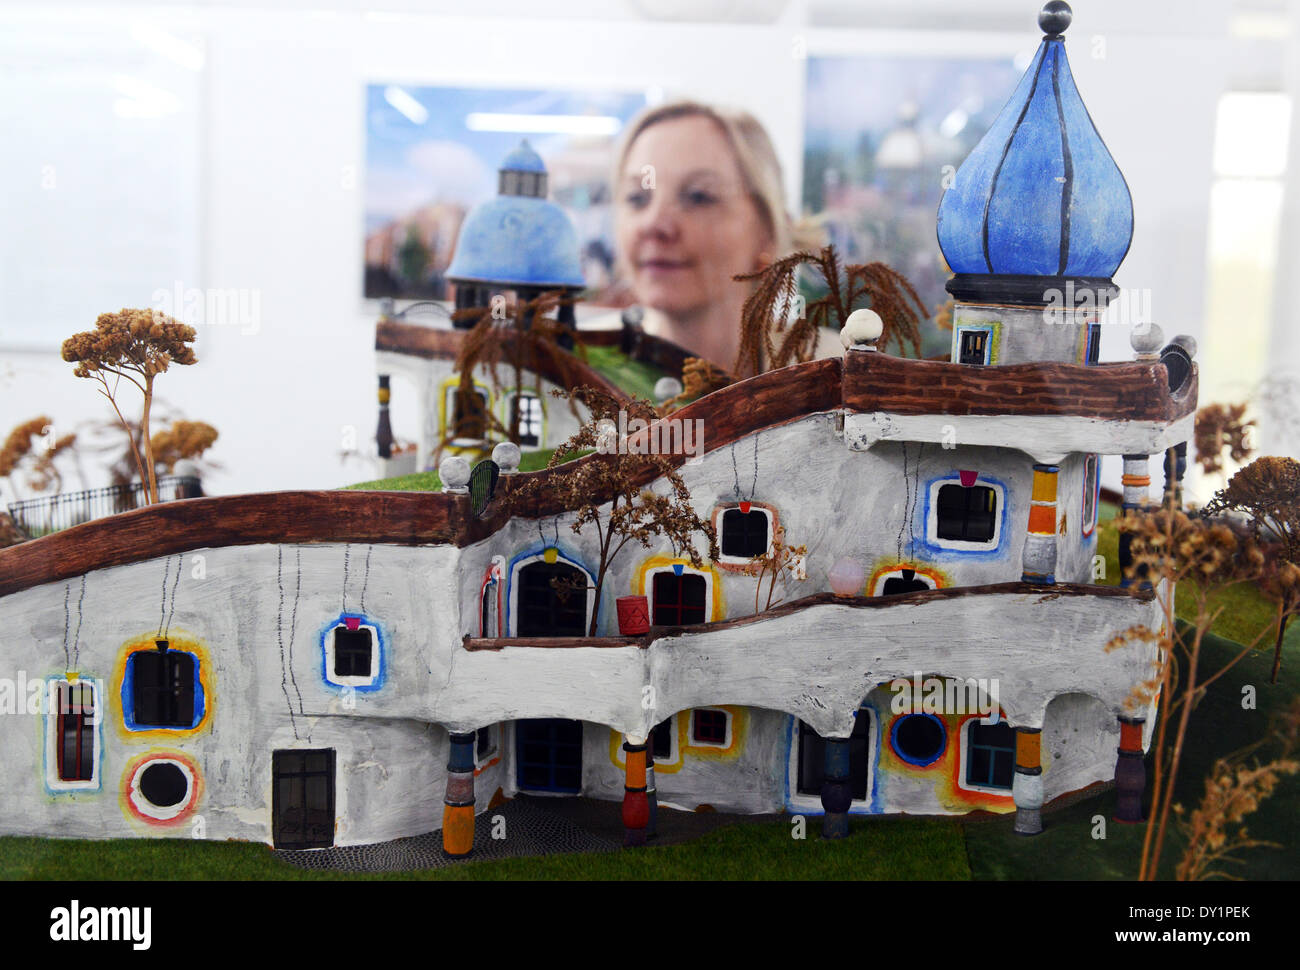 Riegel, Germany. 03rd Apr, 2014. A woman stands in front of the model daycare center Heddernheim by Austrian artist Friedensreich Hundertwasser at Kunsthalle Messmer in Riegel, Germany, 03 April 2014. At the center hangs the large painting 'Adam Kadmon'. The exhibition 'Hundertwasser and Ernst Fuchs' runs from 05 April to 14 September 2014. Photo: Patrick Seeger/dpa/Alamy Live News Stock Photo